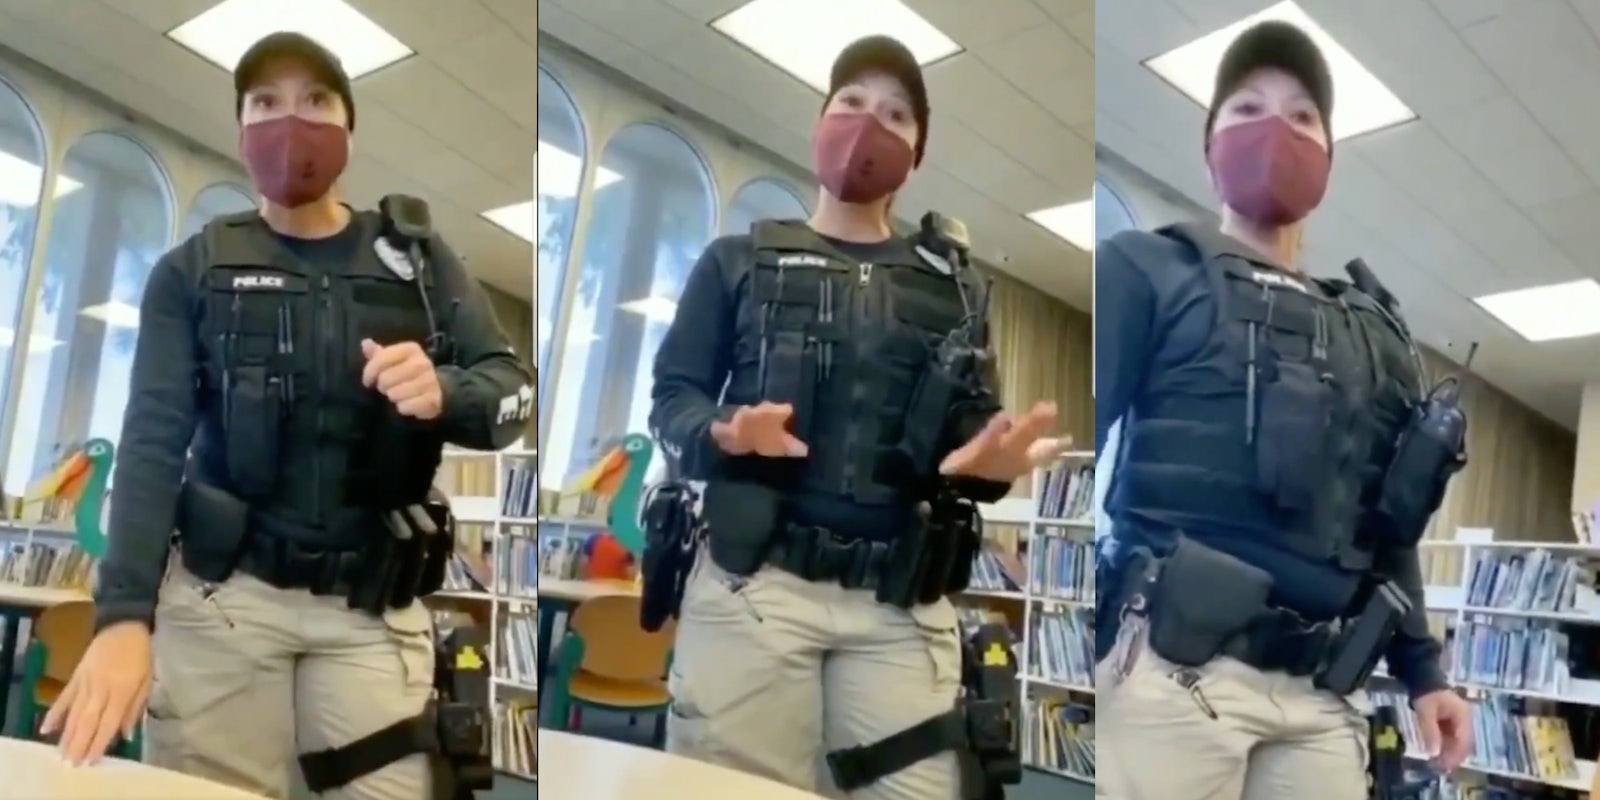 Police officer asks 'Library Karen' to leave public library after she refuses to wear a mask.